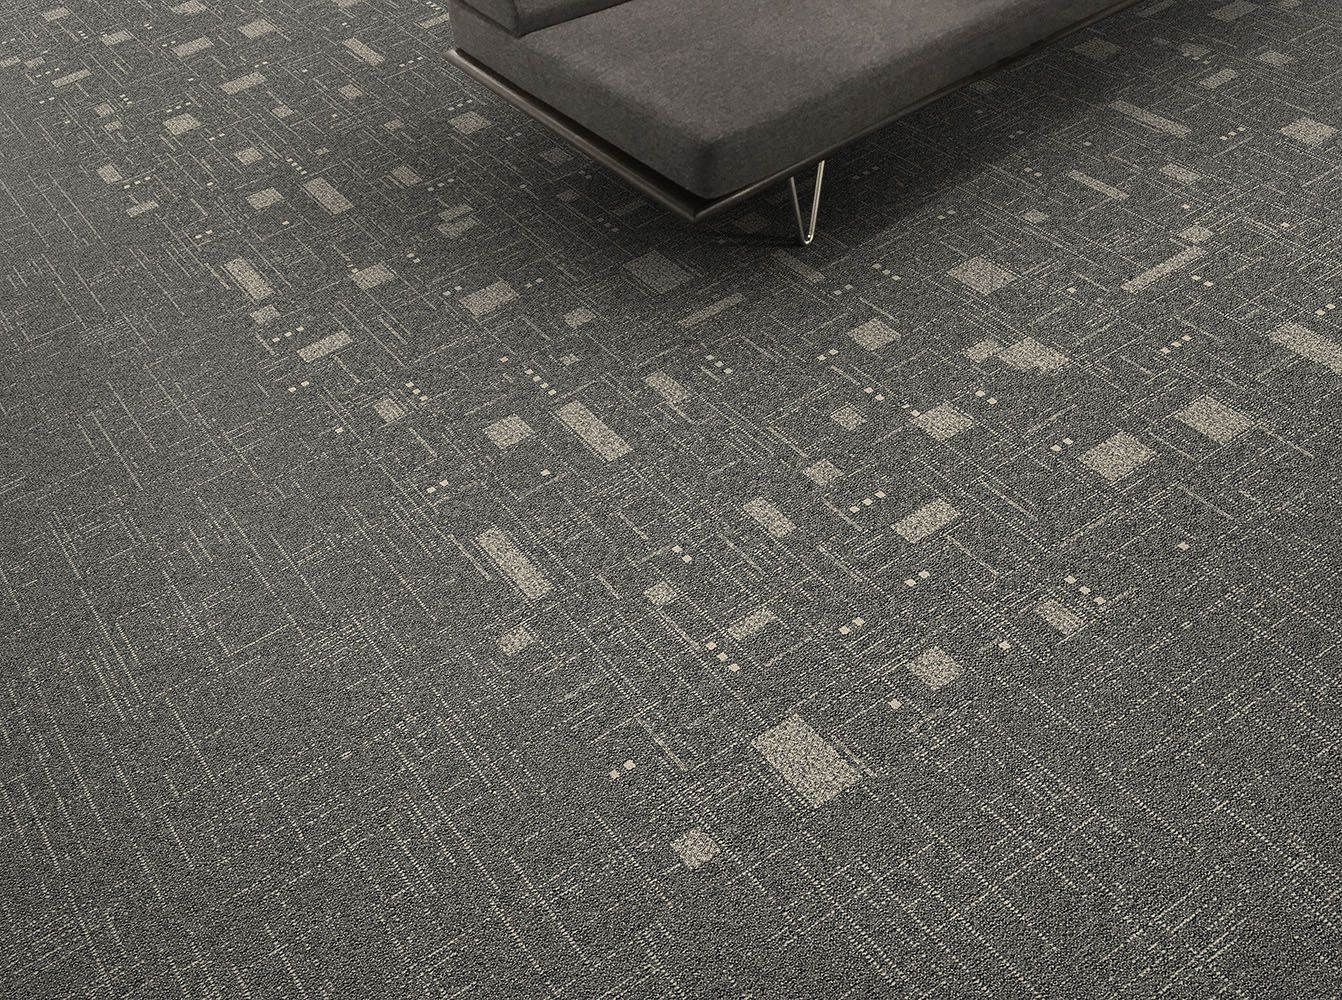 Detail image of Interface DL901 and DL903 carpet tile with bench imagen número 4